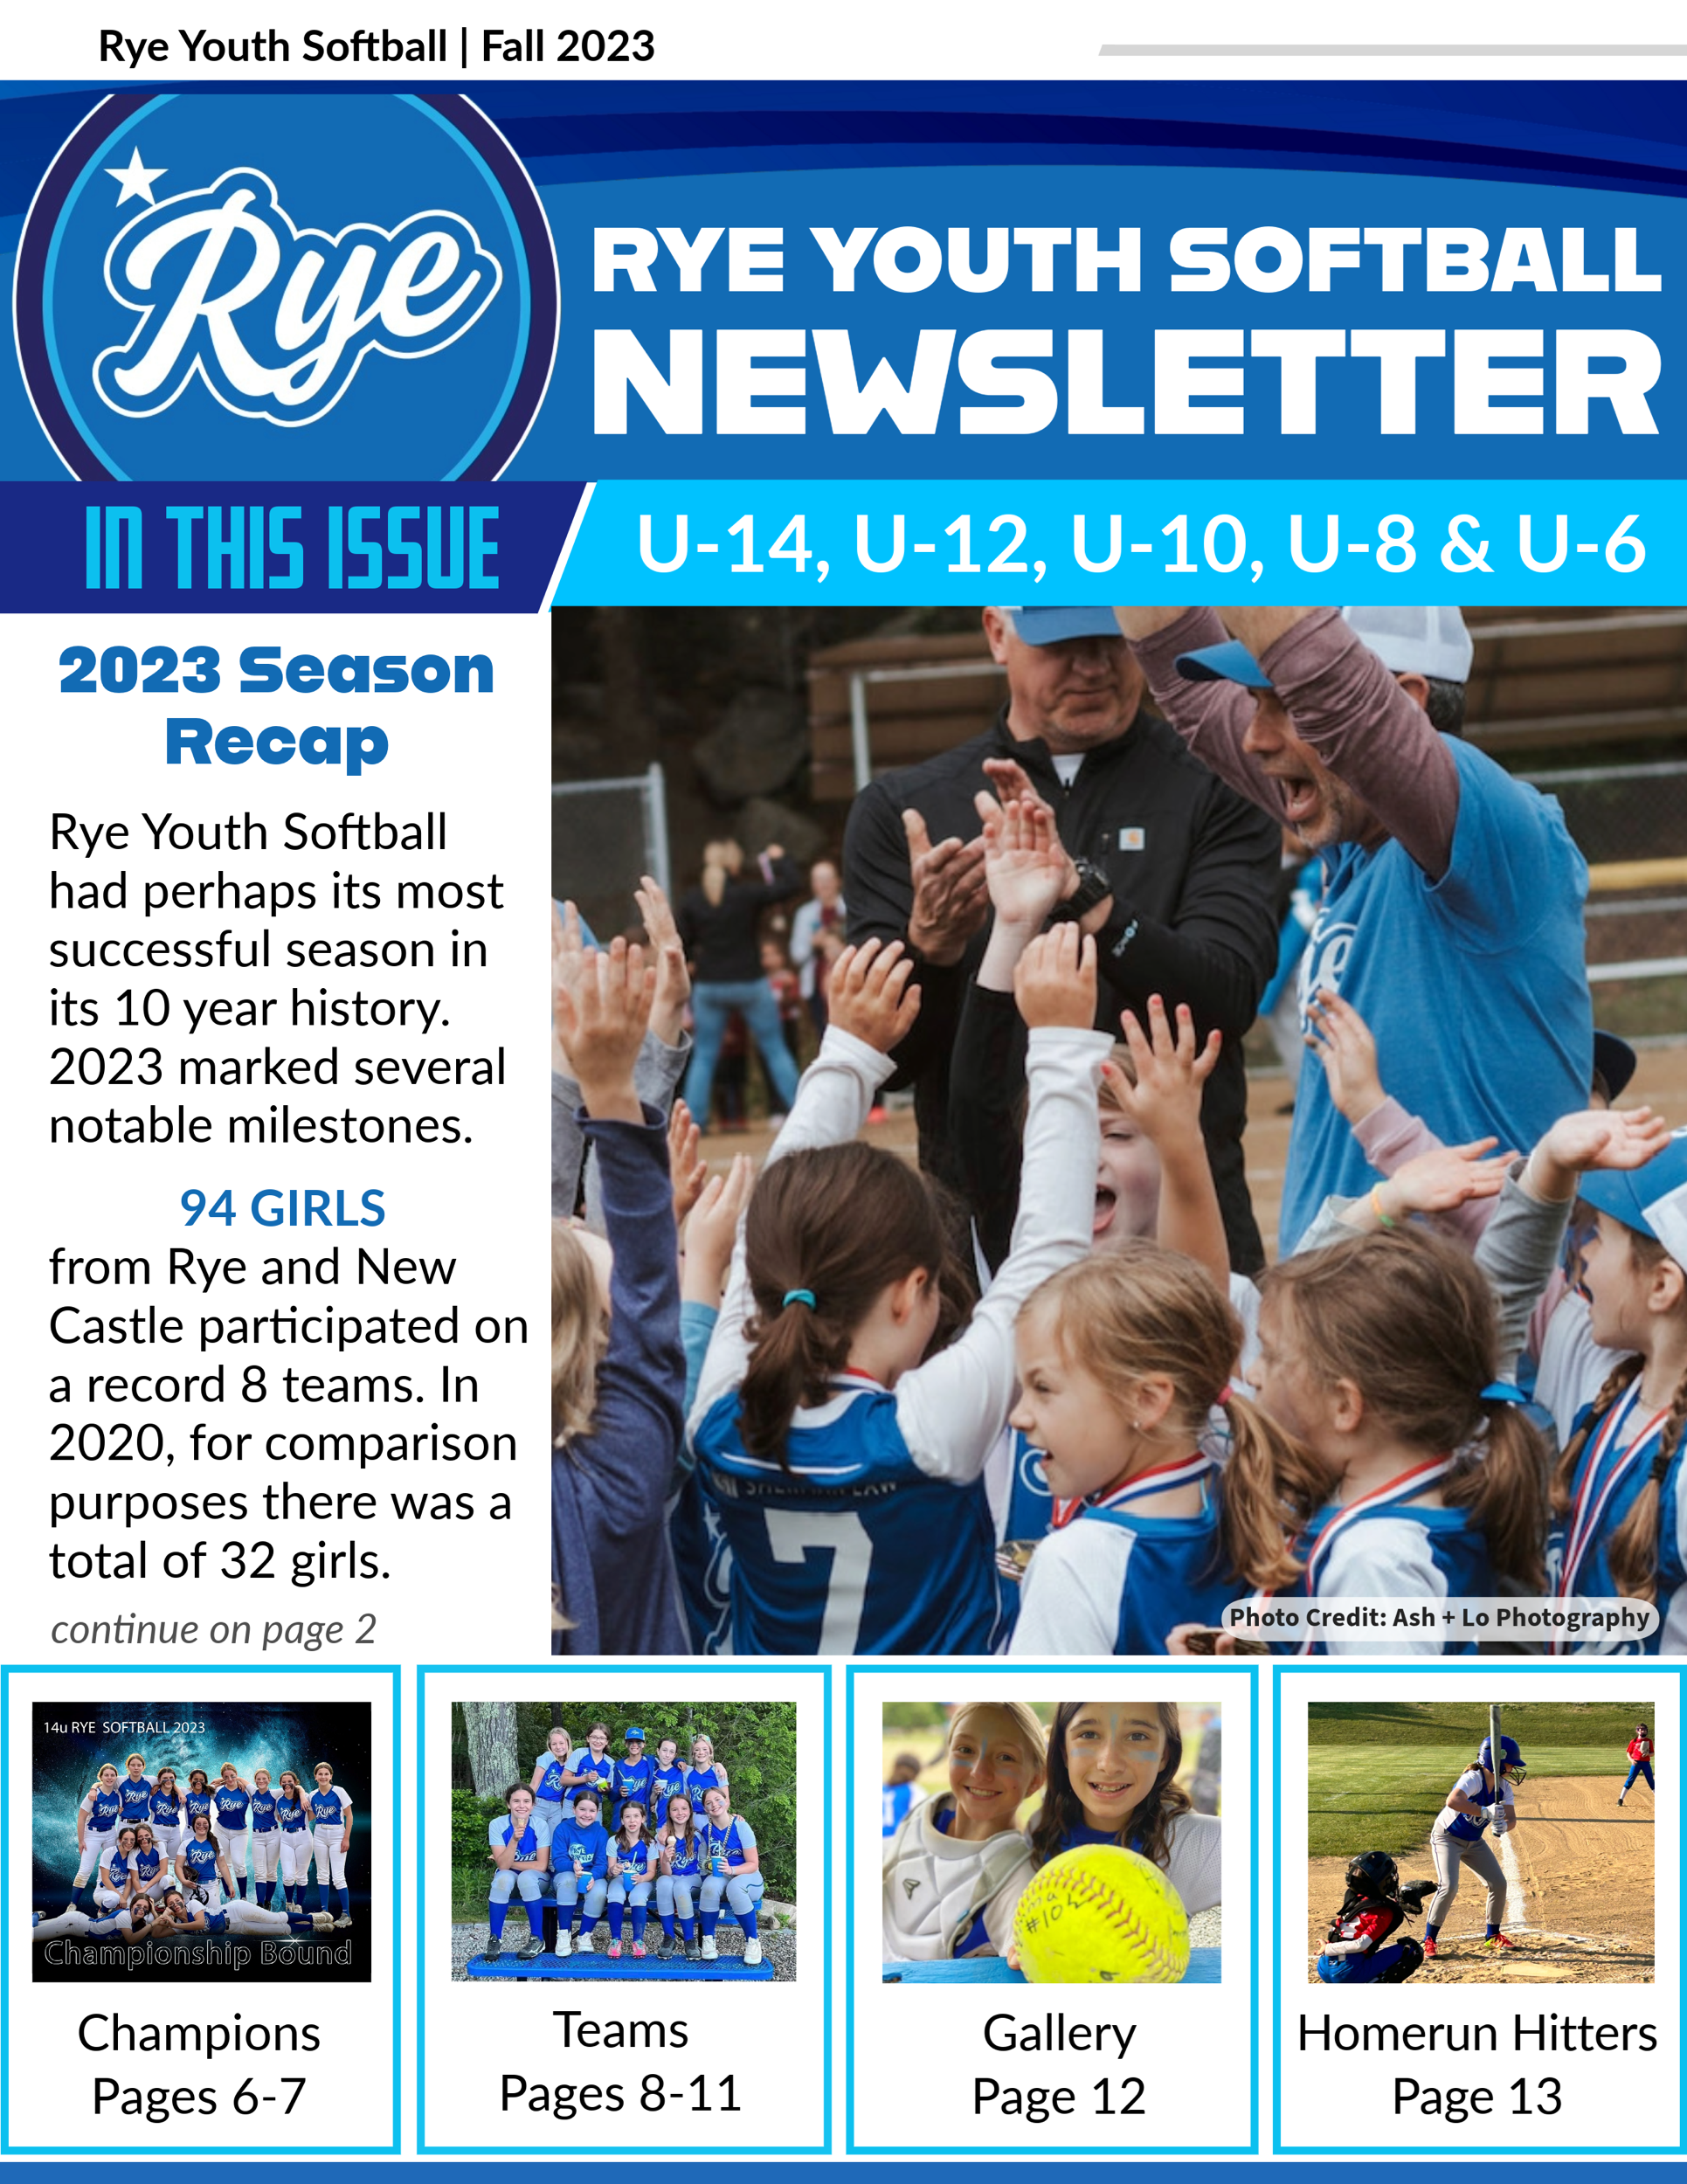 rys newsletter fall 23-1.png